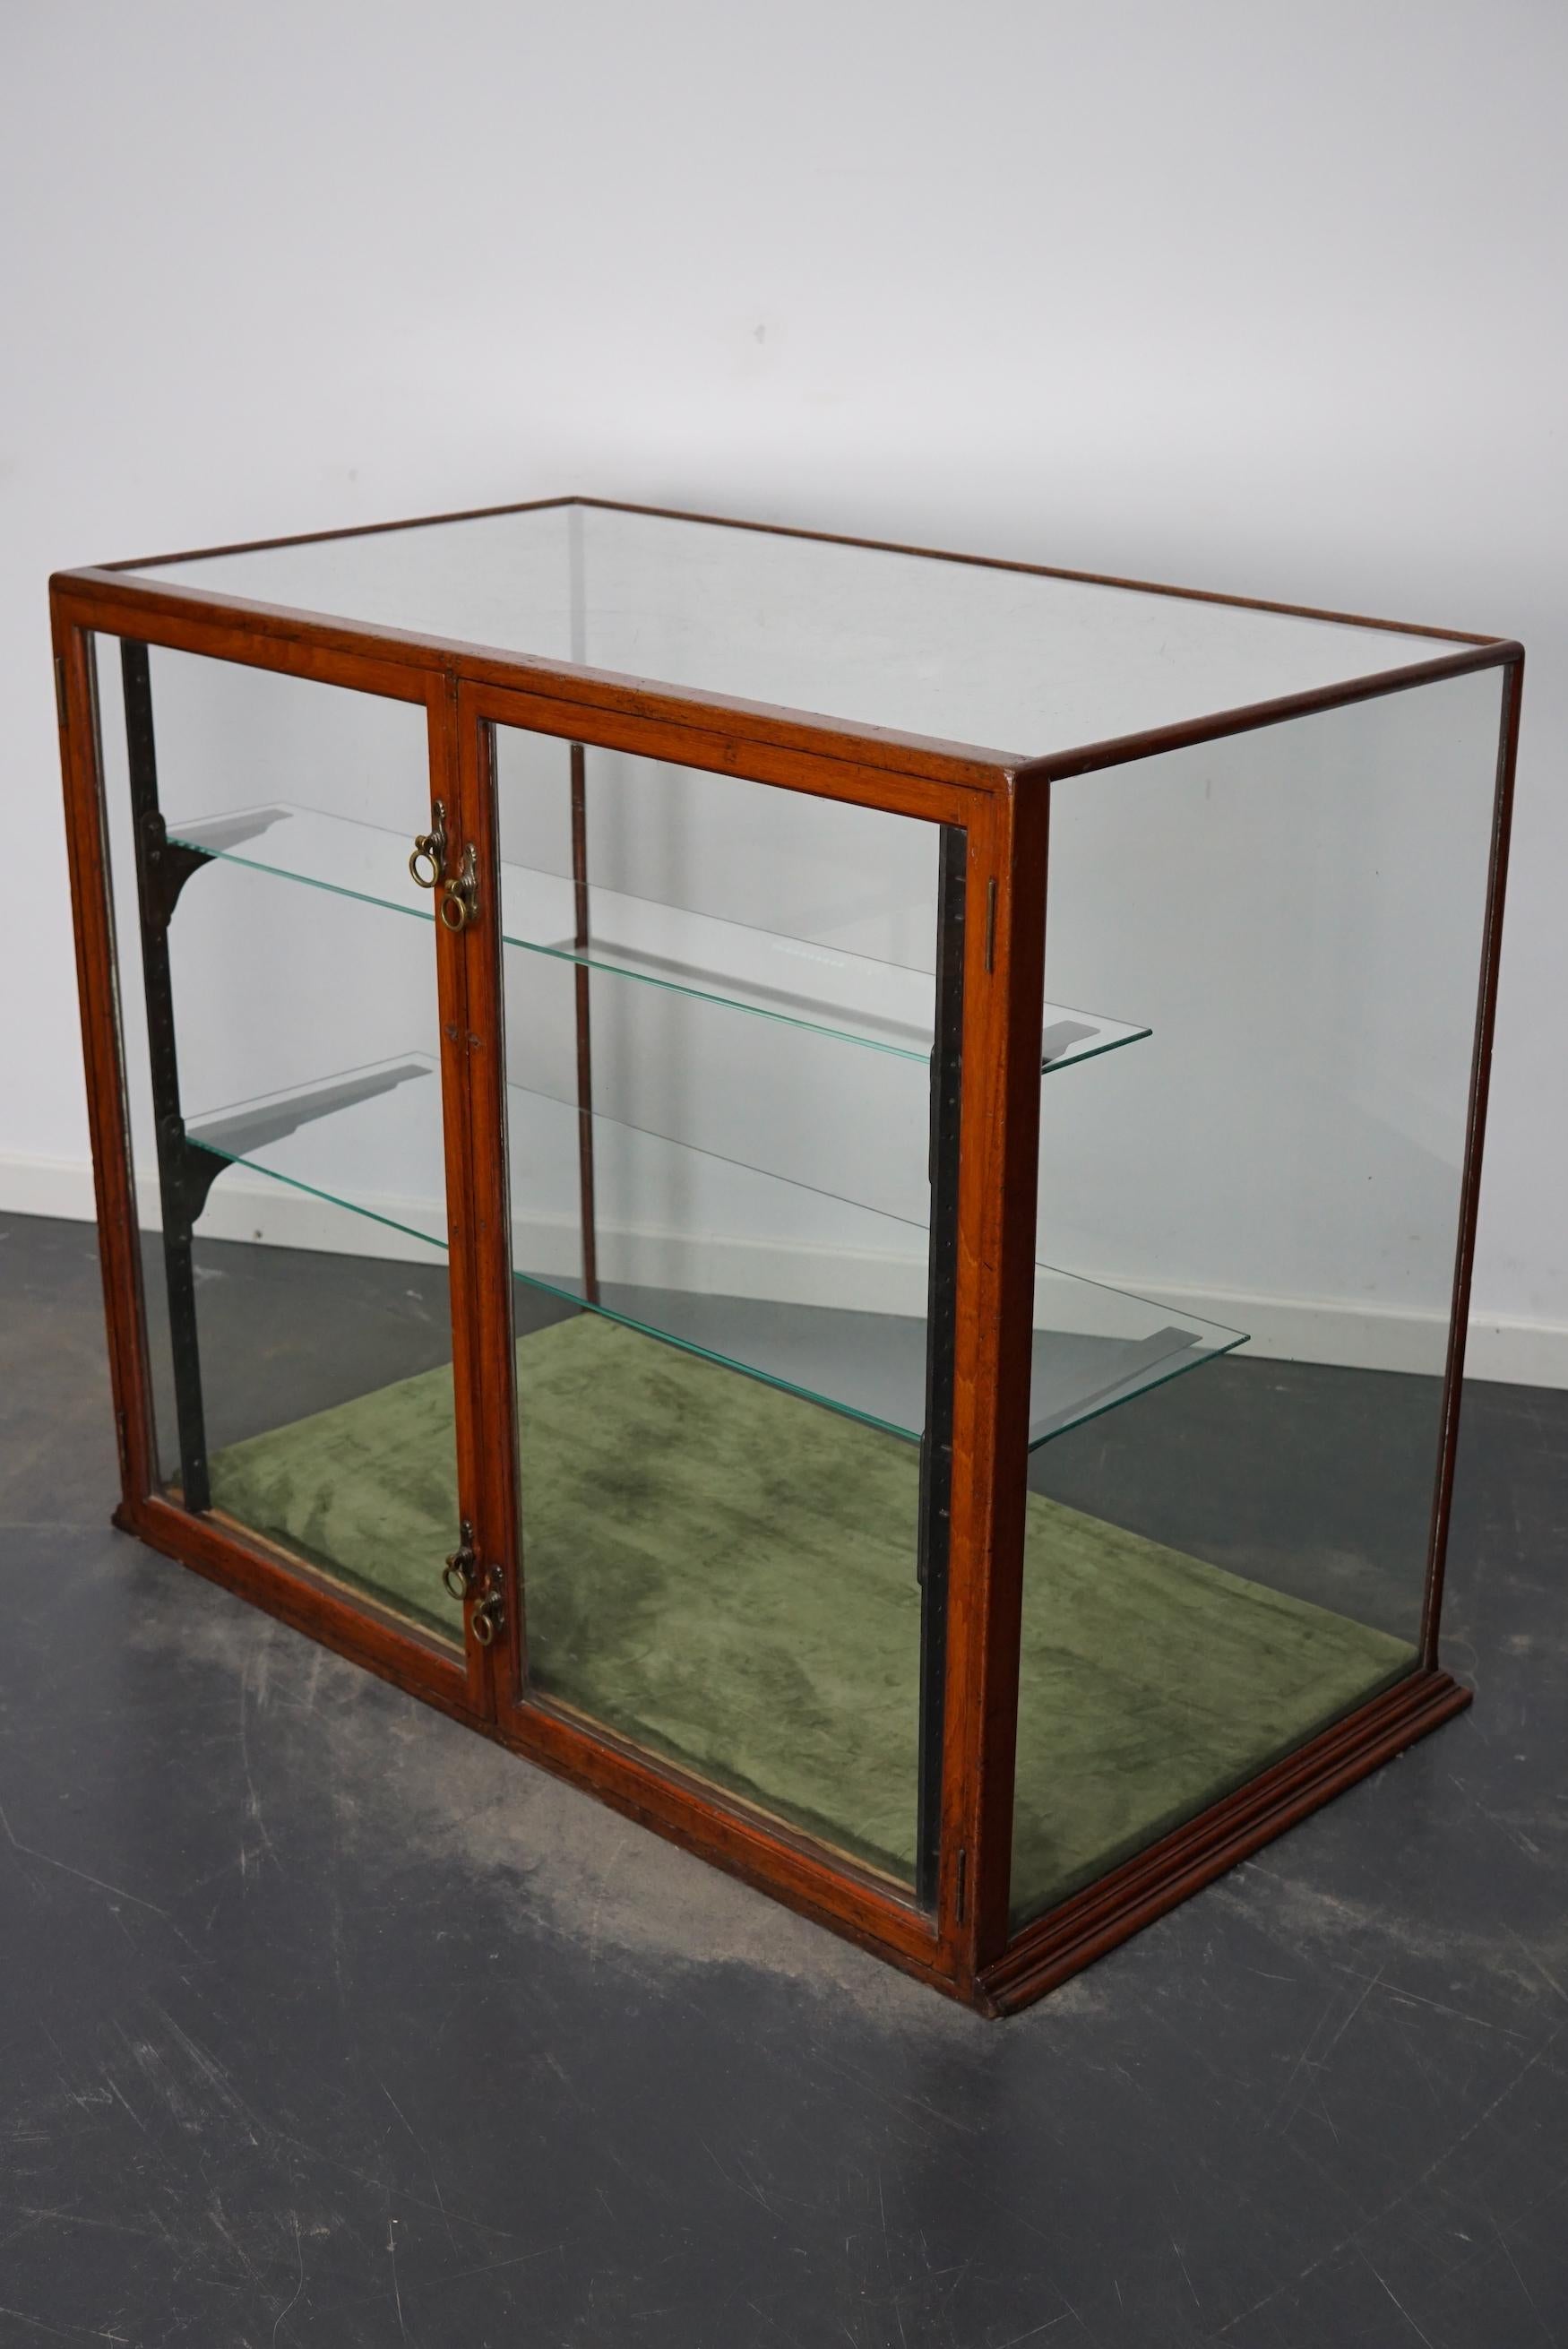 Late Victorian Victorian Mahogany Shop Display Cabinet / Counter or Vitrine, Late 19th Century For Sale